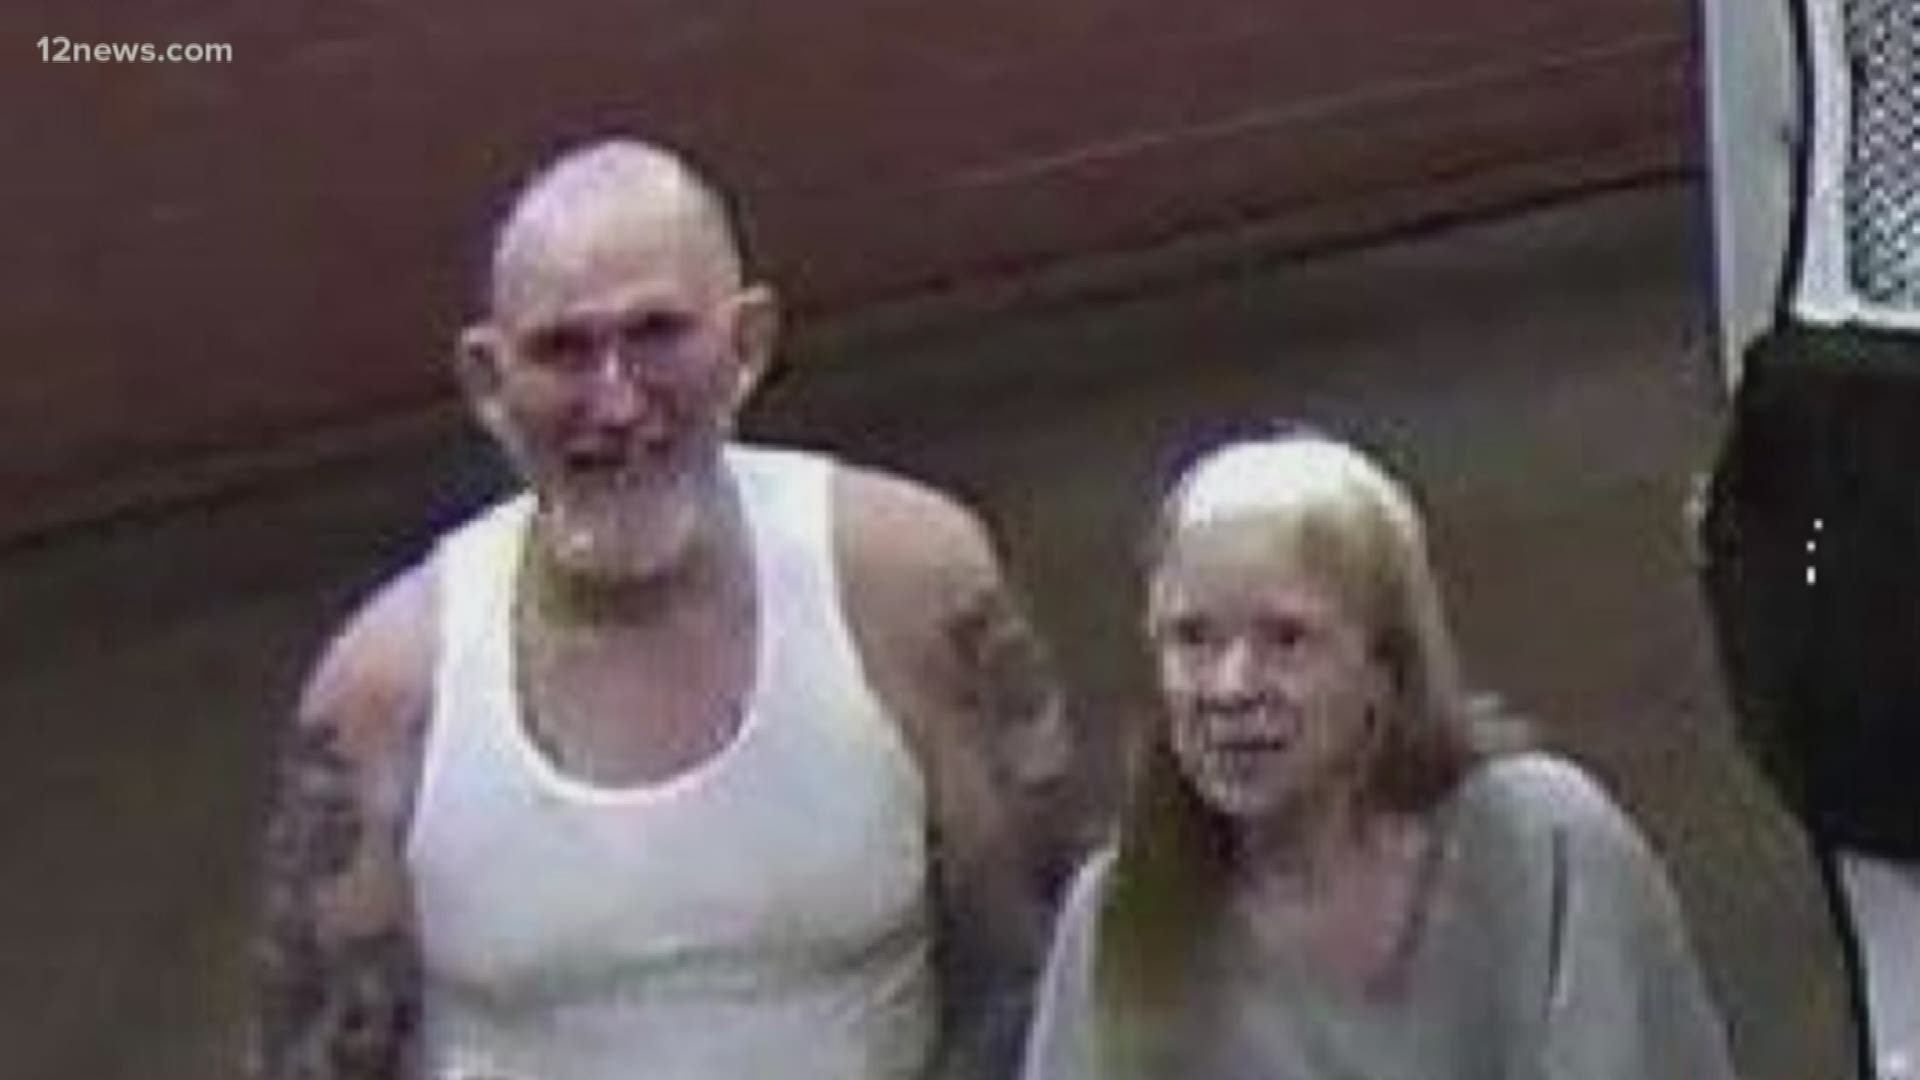 Blane and Susan Barksdale, the Tucson couple accused of murdering a Tucson man and escaping from prison transport guards, are still on the run. Updated photos of the couple have been released. Authorities say the couple is likely armed and dangerous.